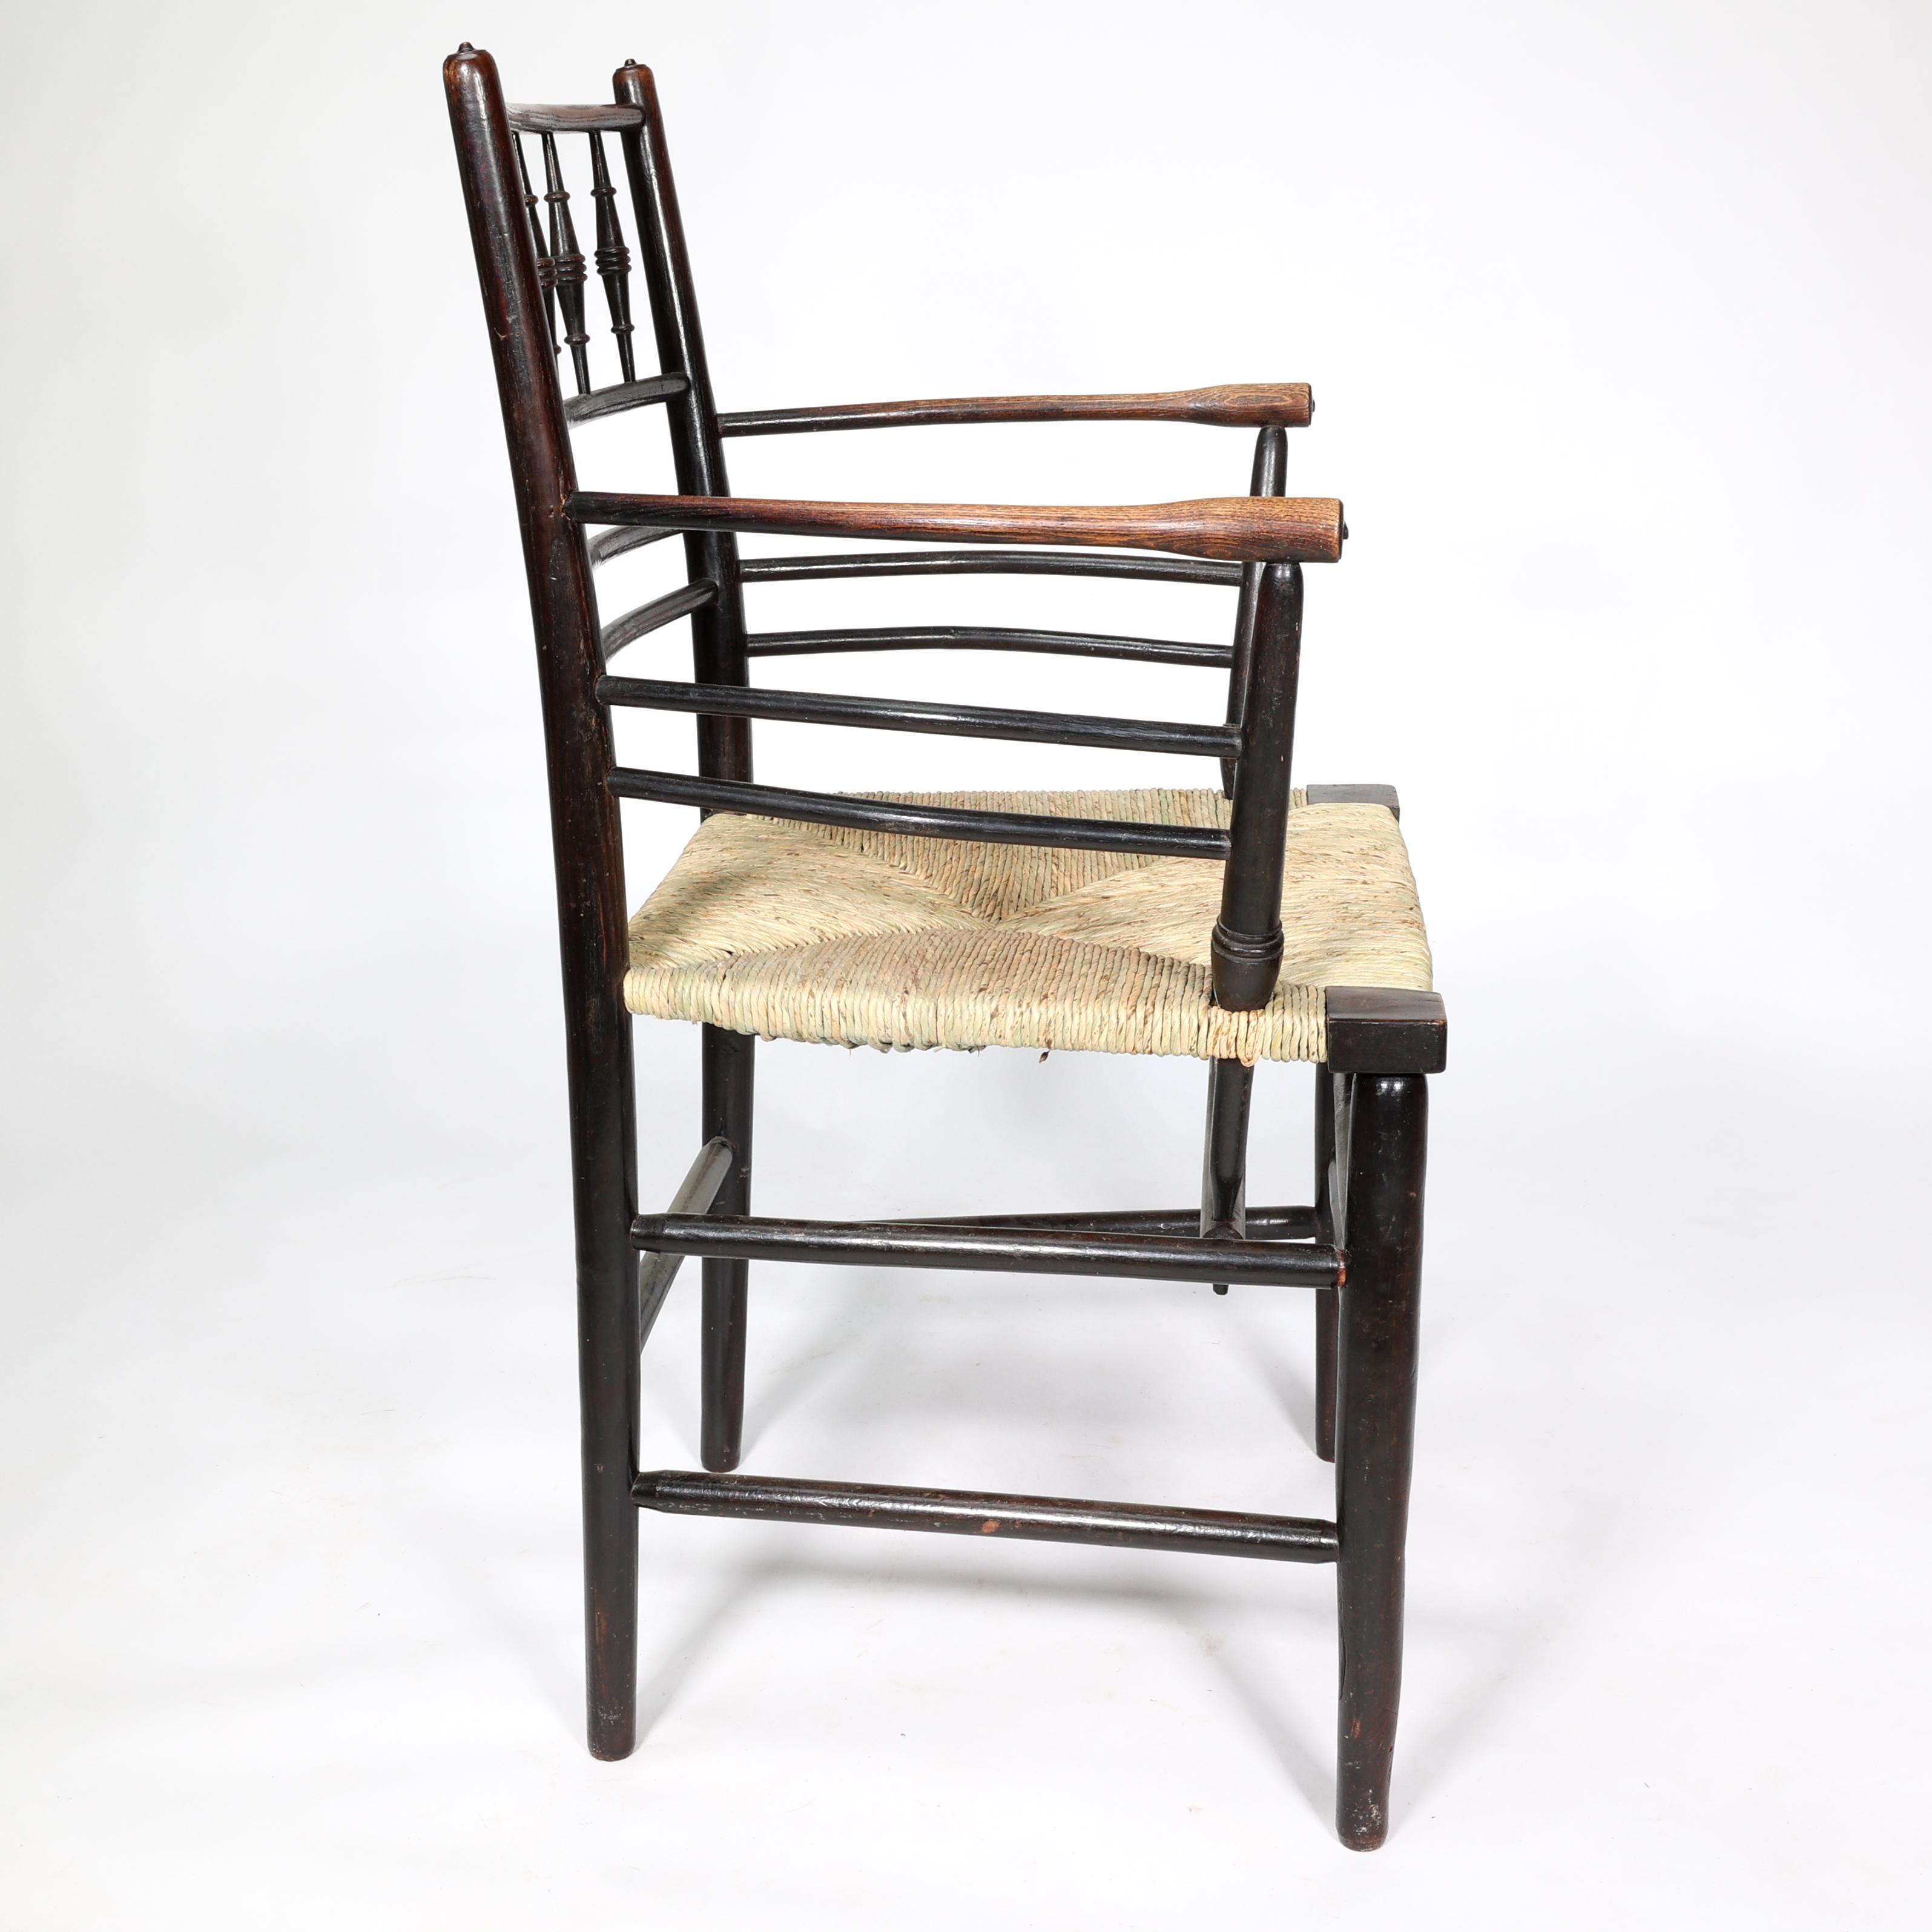 Ebonized William Morris, A Classic Arts & Crafts Ebonised Armchair from the Sussex Range.